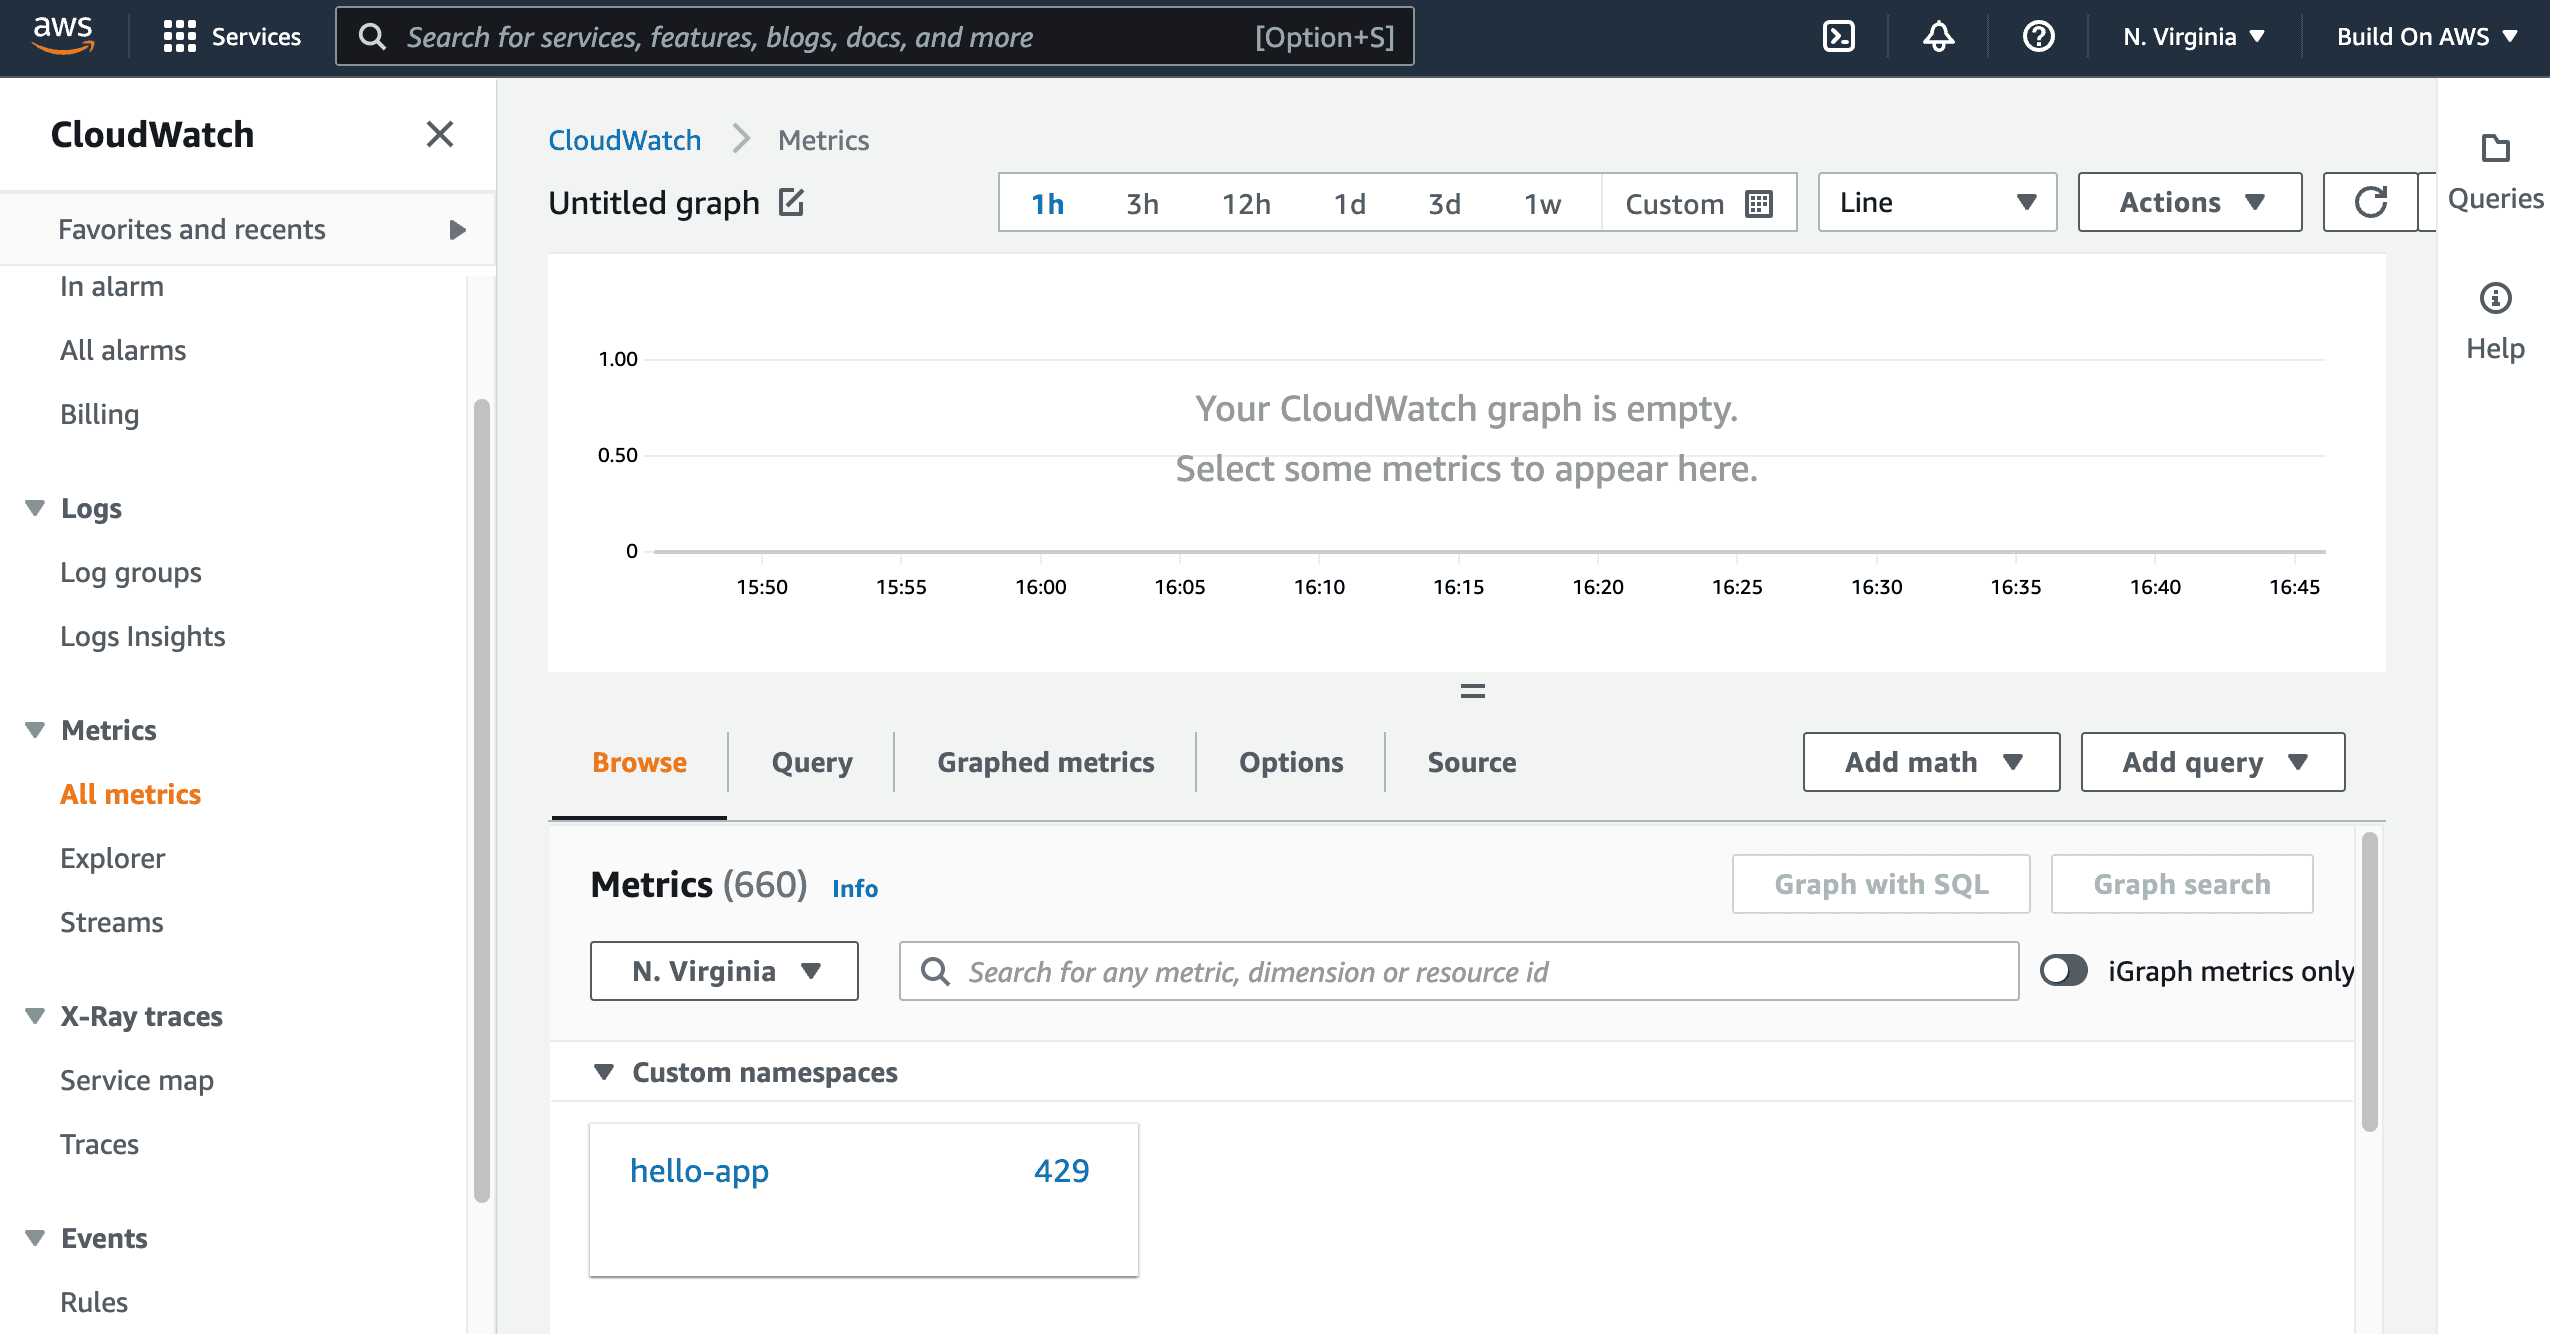 Shows all metrics collected in CloudWatch